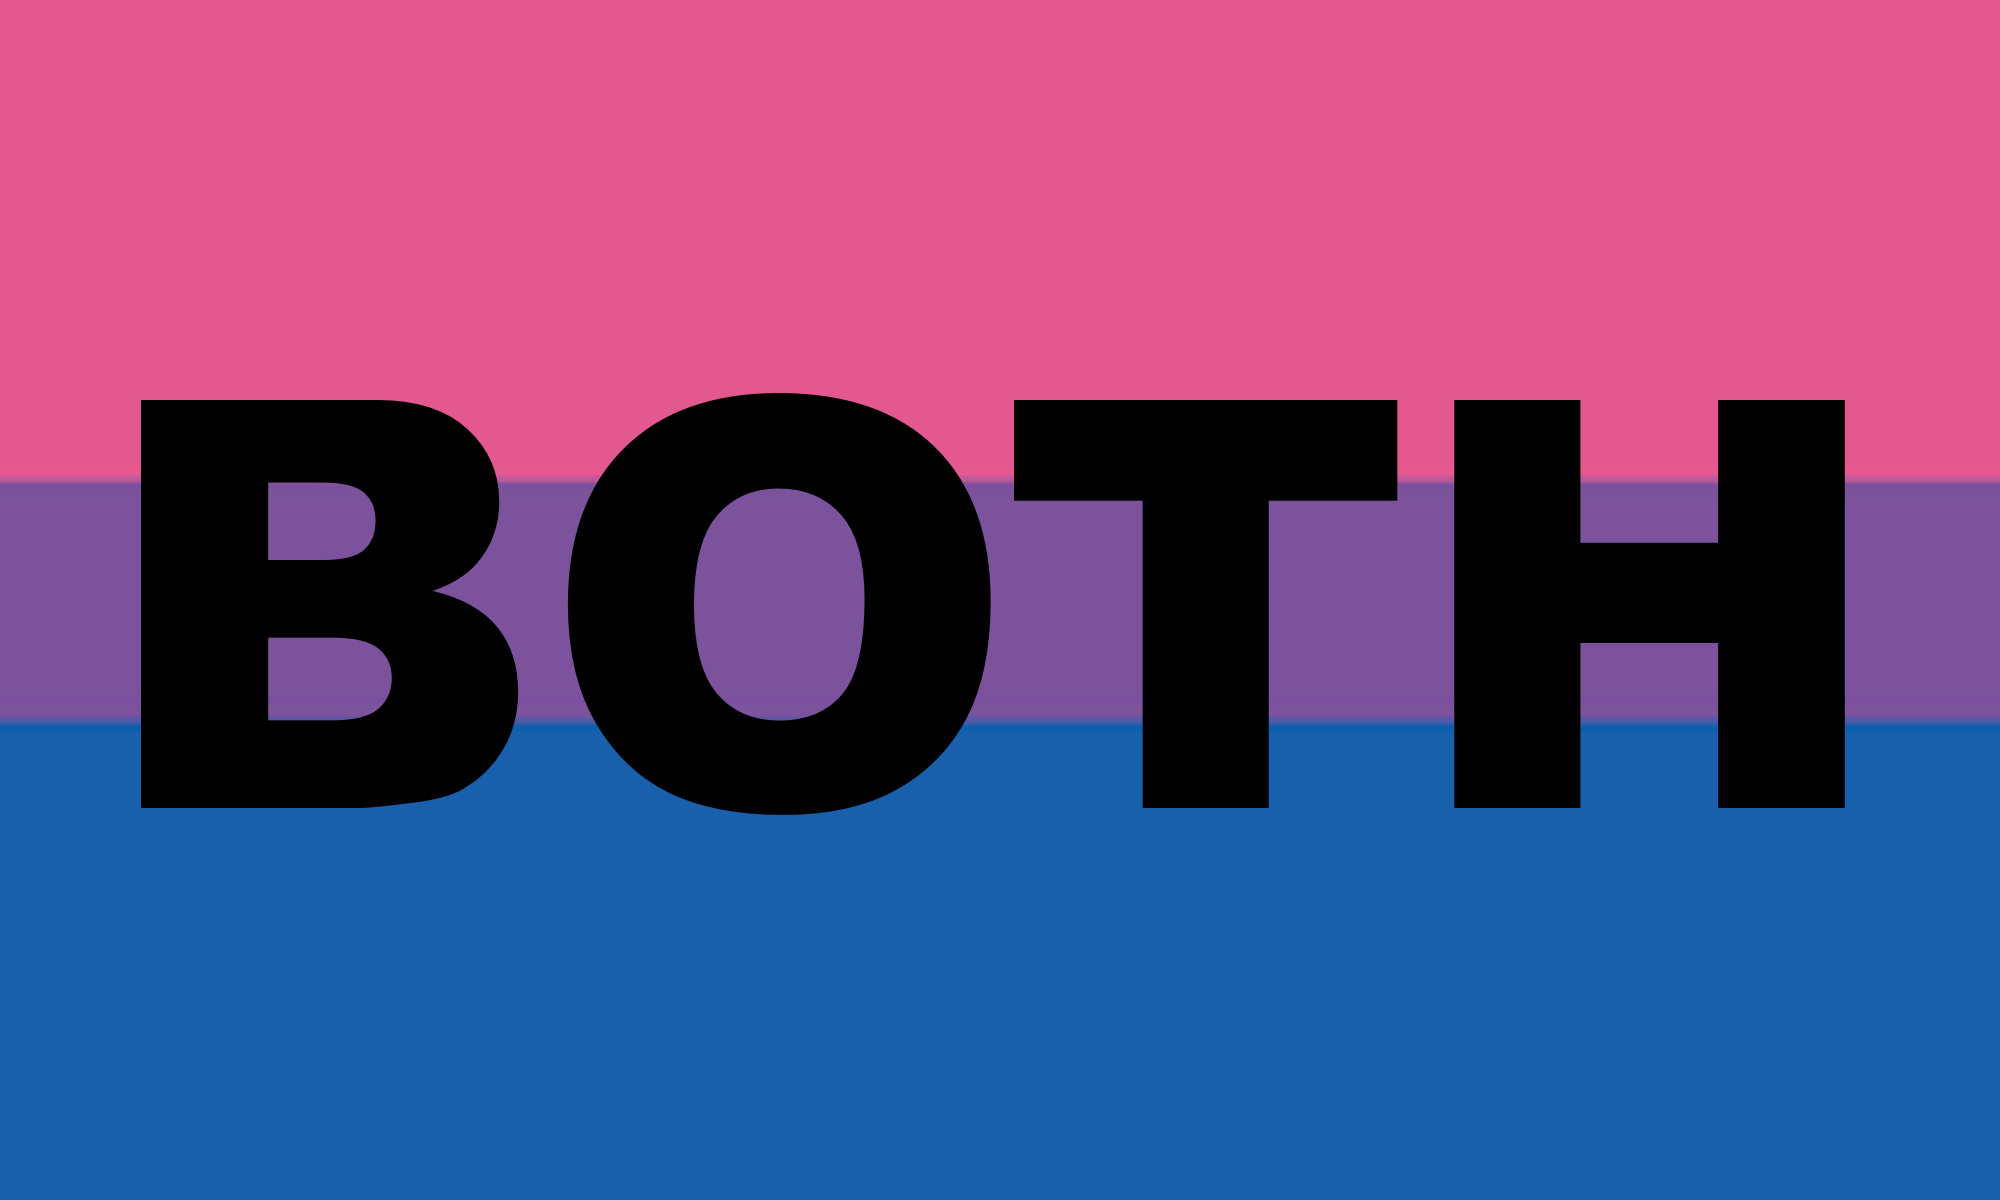 The bisexual flag with the word "BOTH" overlaid.